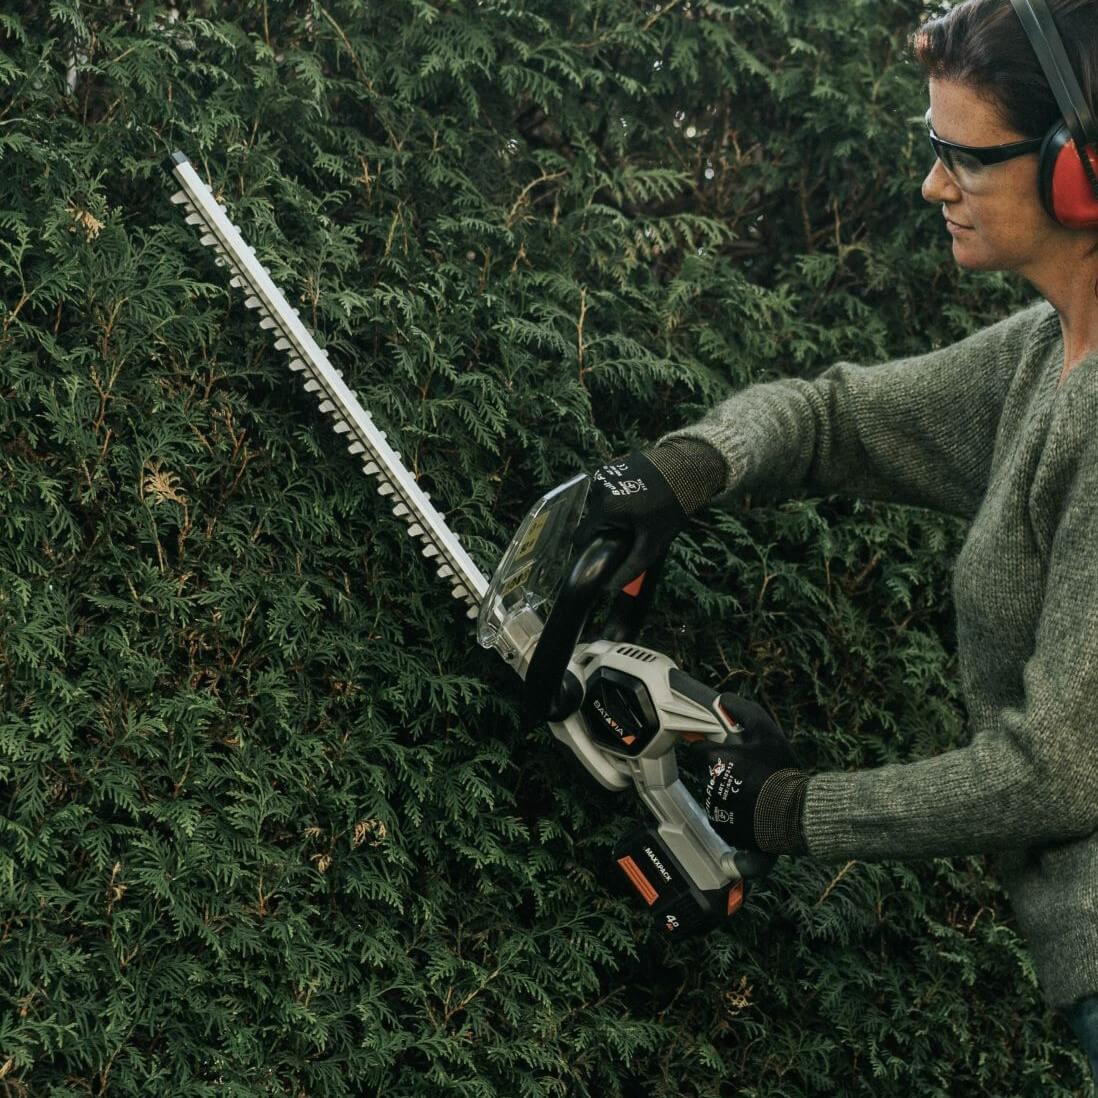 Cordless Hedge Trimmer | Maxxpack collection | Batavia